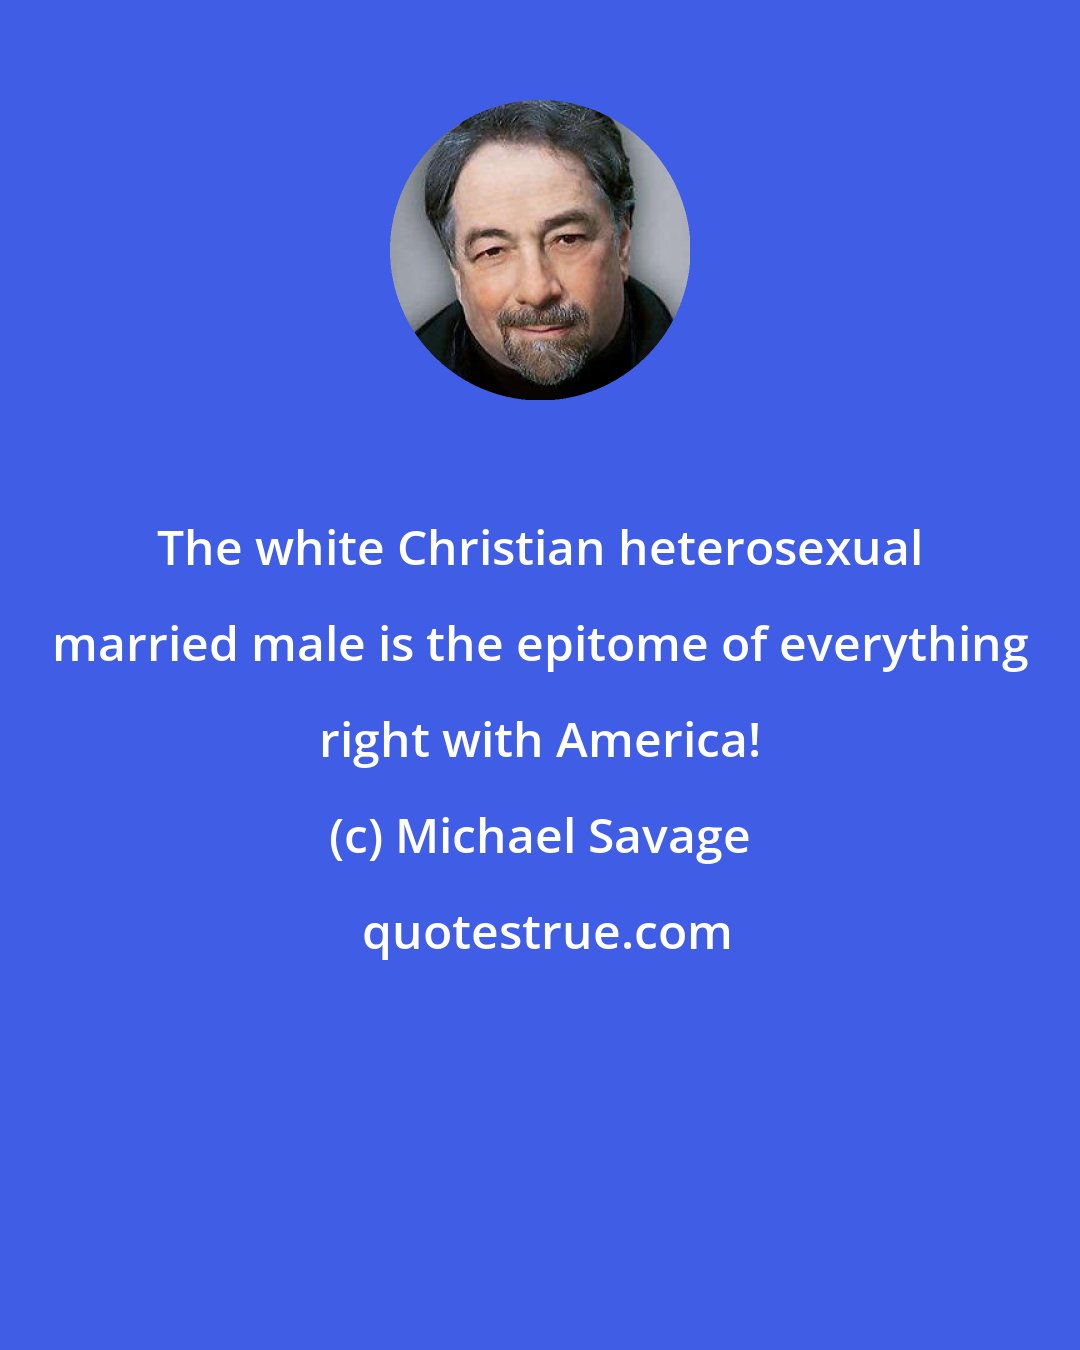 Michael Savage: The white Christian heterosexual married male is the epitome of everything right with America!